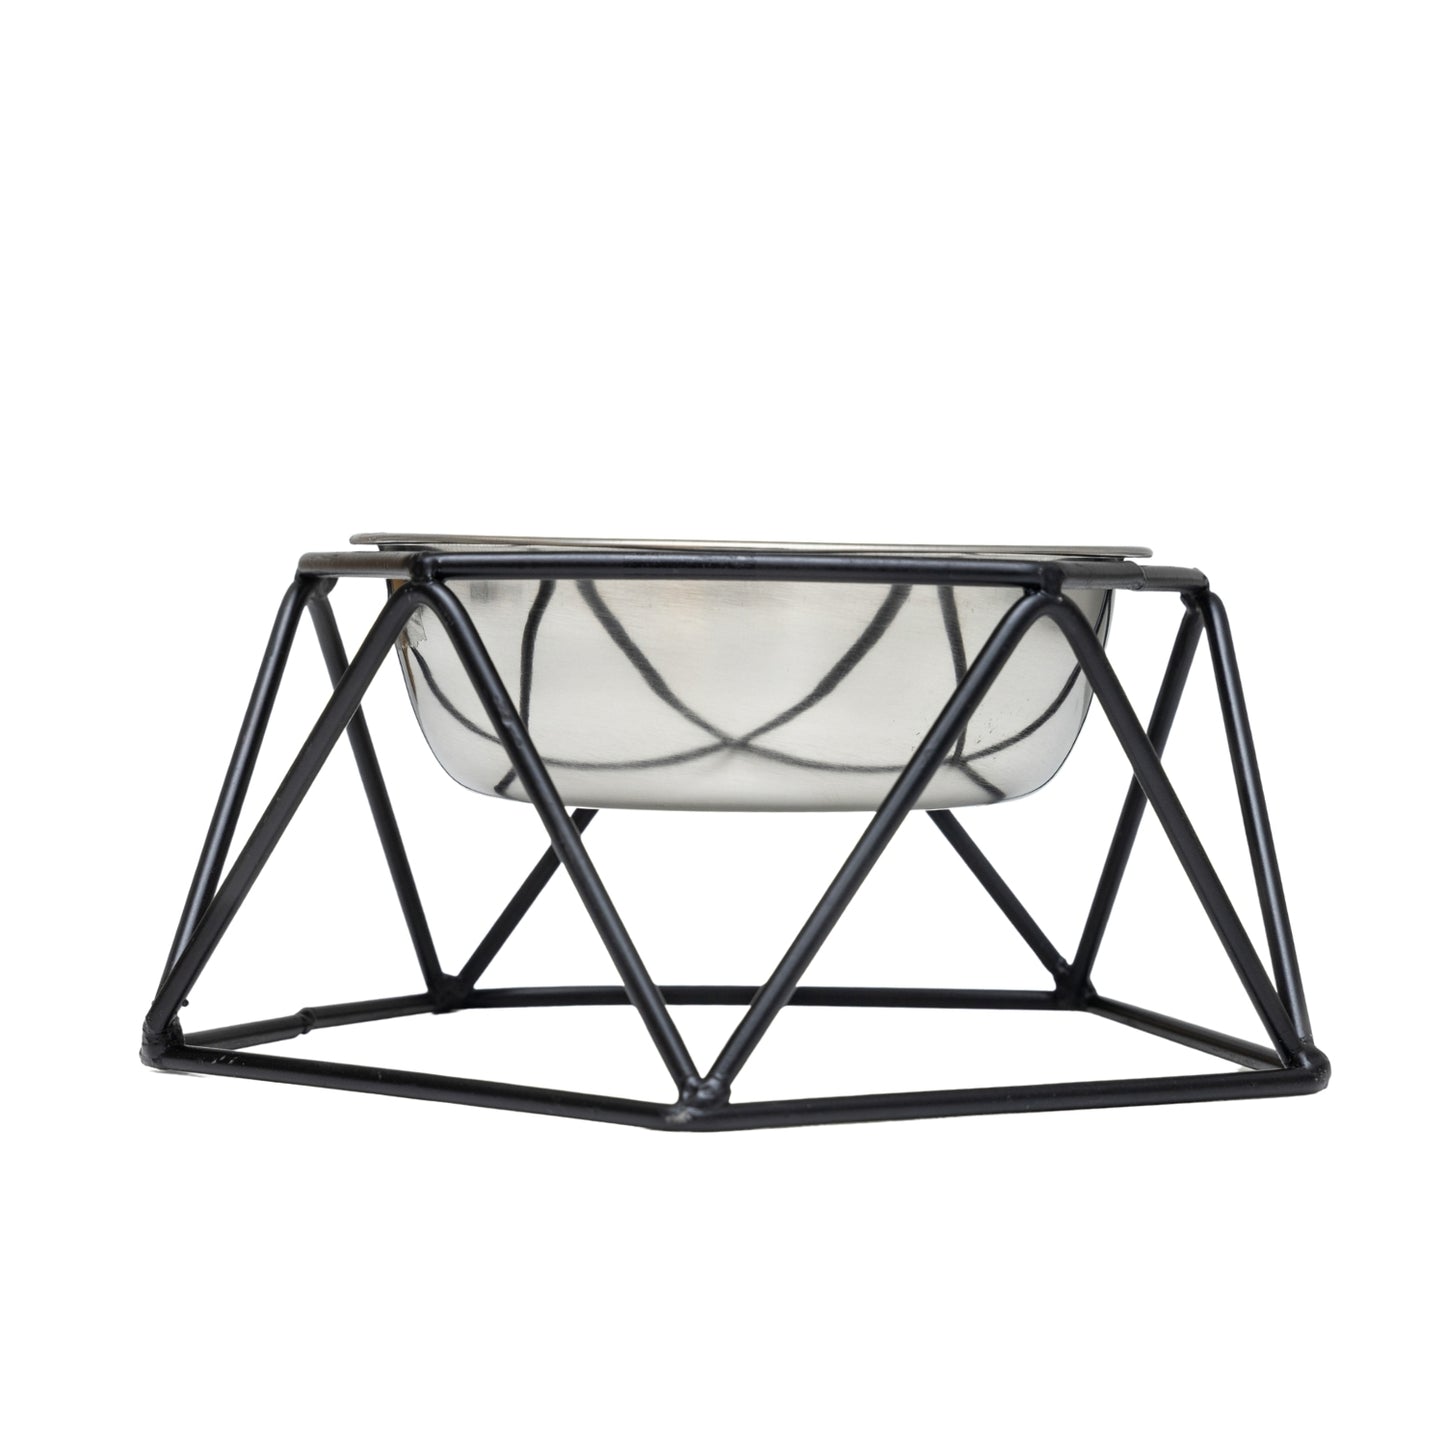 Country Living Modern Hexagonal Black Geometric Dog Feeder with Stainless Steel Bowl